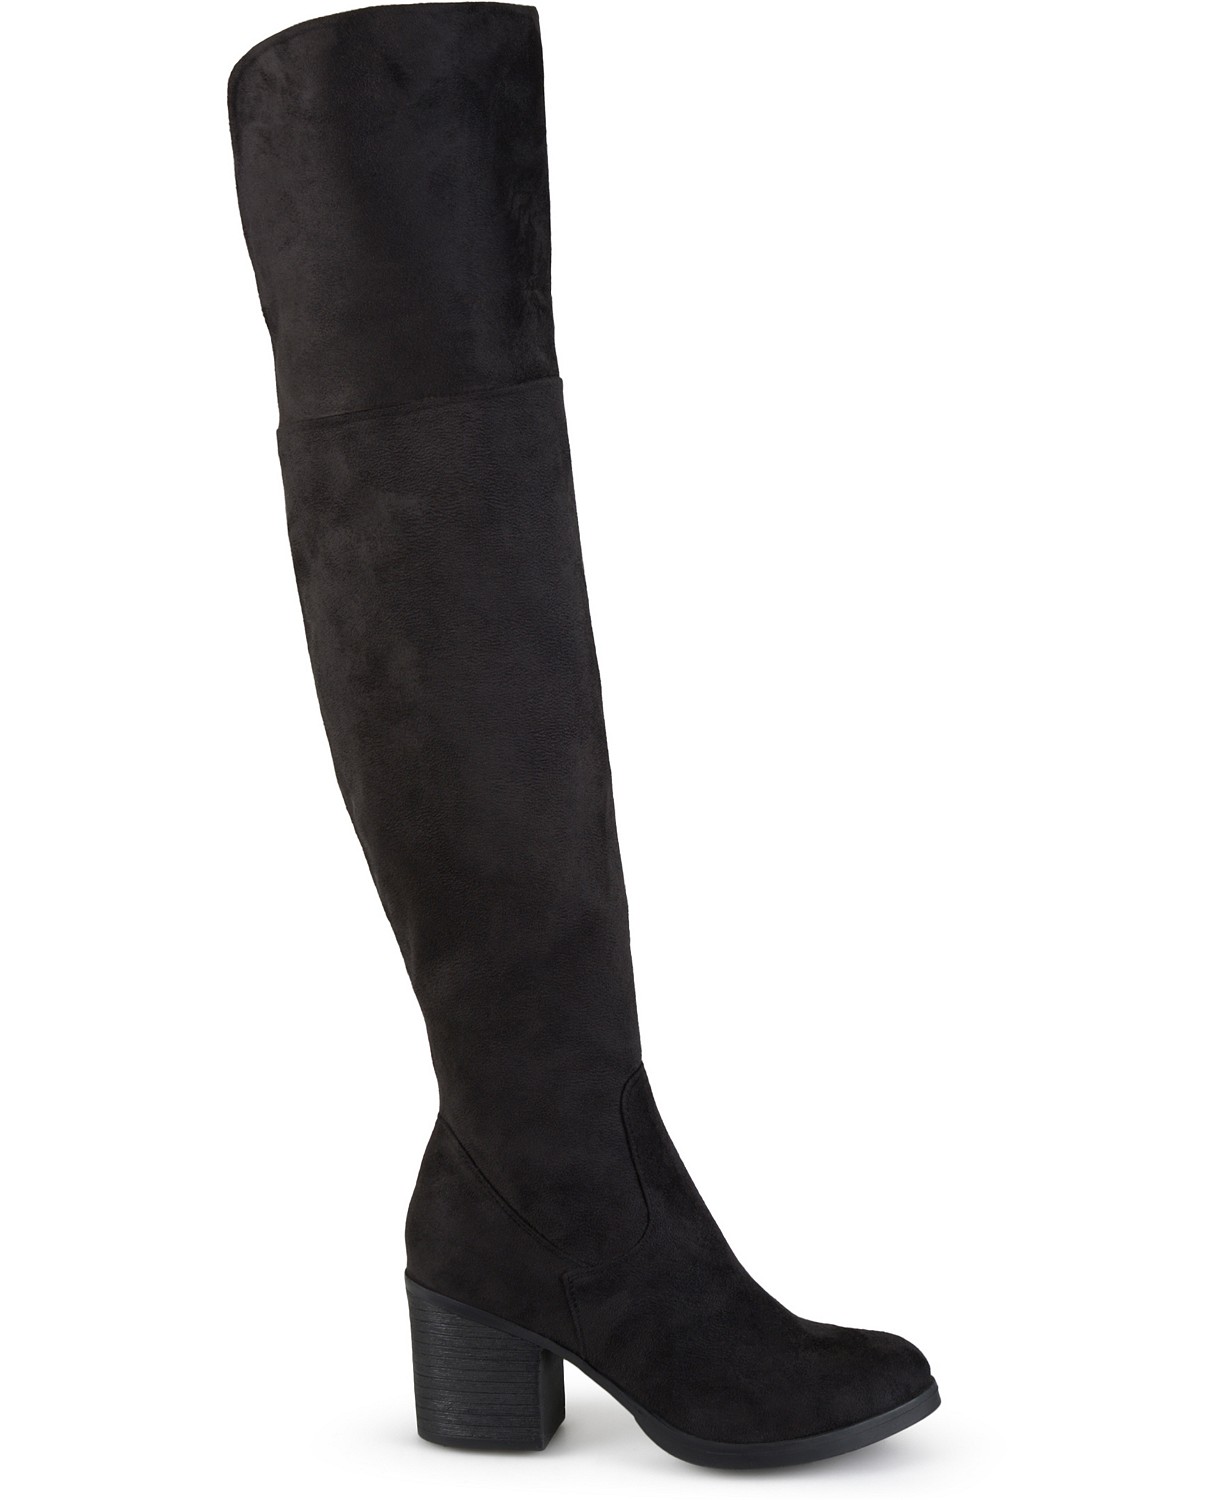 woocommerce-673321-2209615.cloudwaysapps.com-journee-collection-womens-black-wide-calf-sana-boots